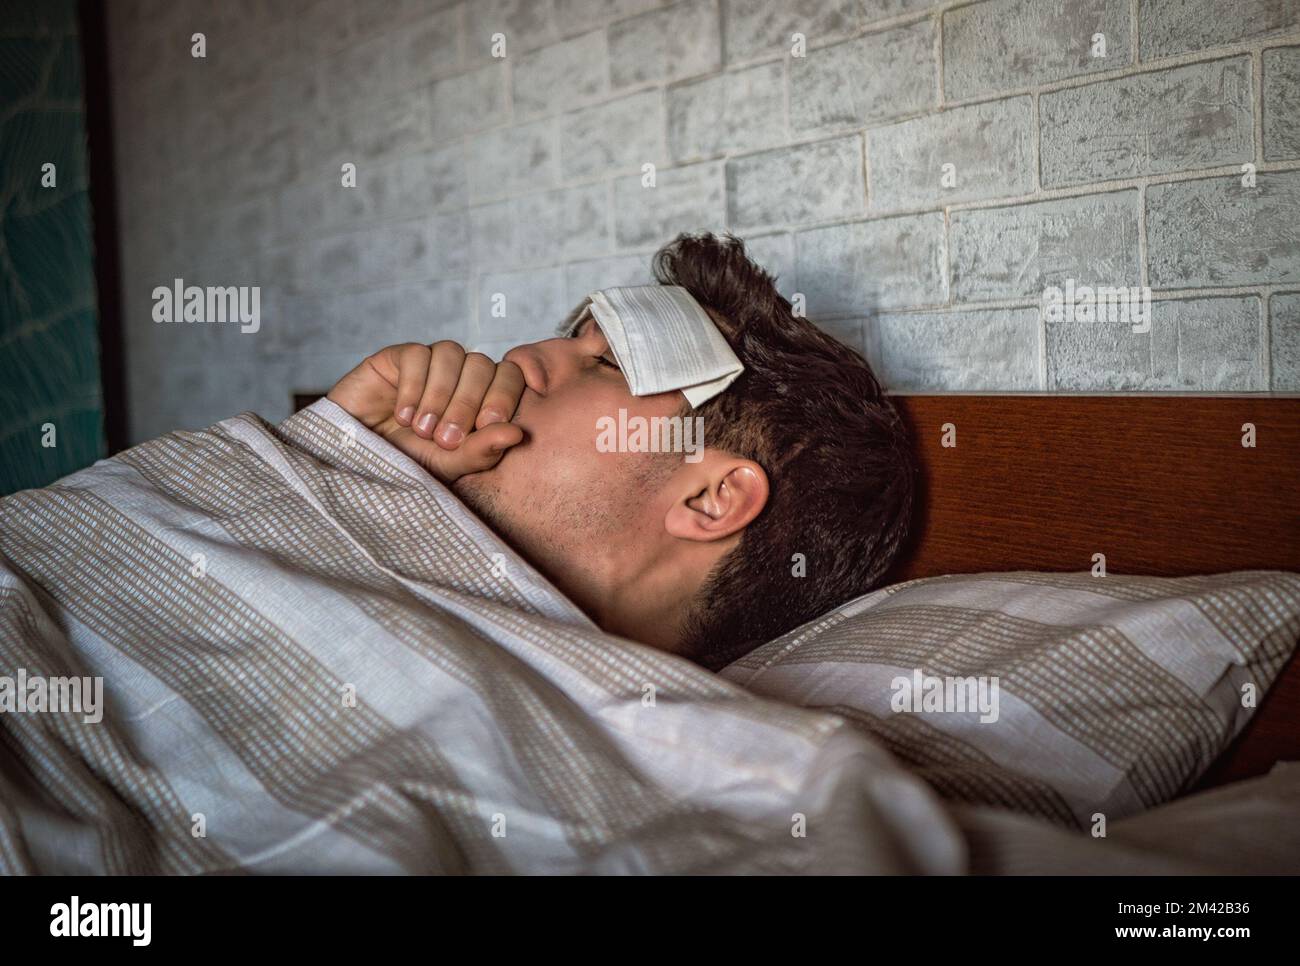 Young handsome sick or unwell man in bed with a flu or fever Stock Photo